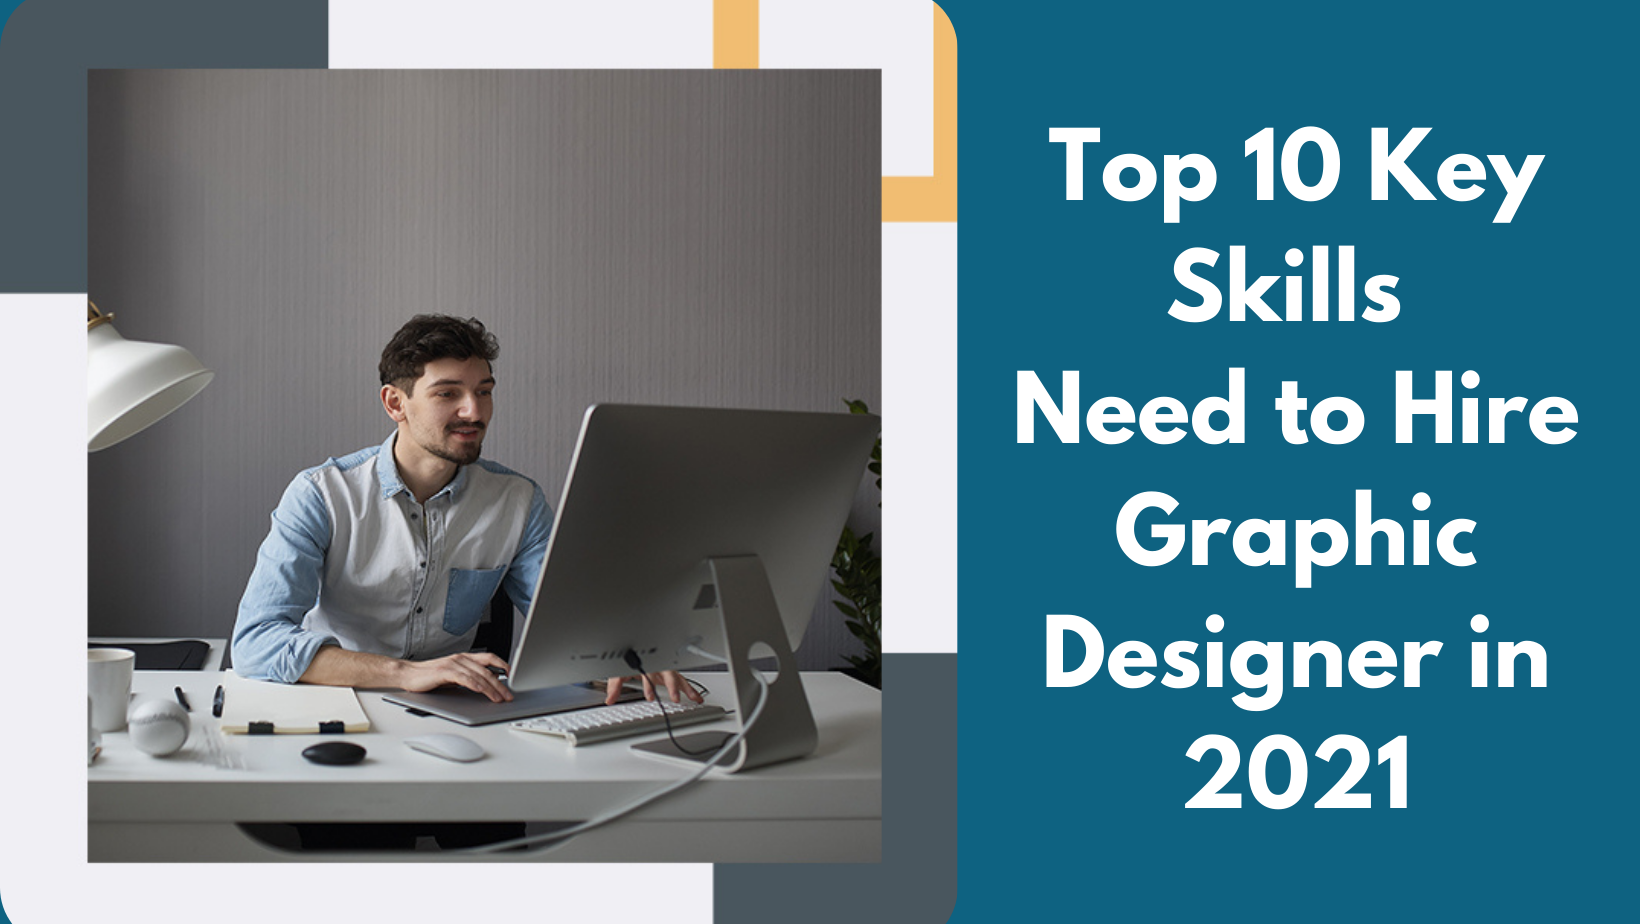 Top 10 Key Skills Need to Hire Graphic Designer in 2021